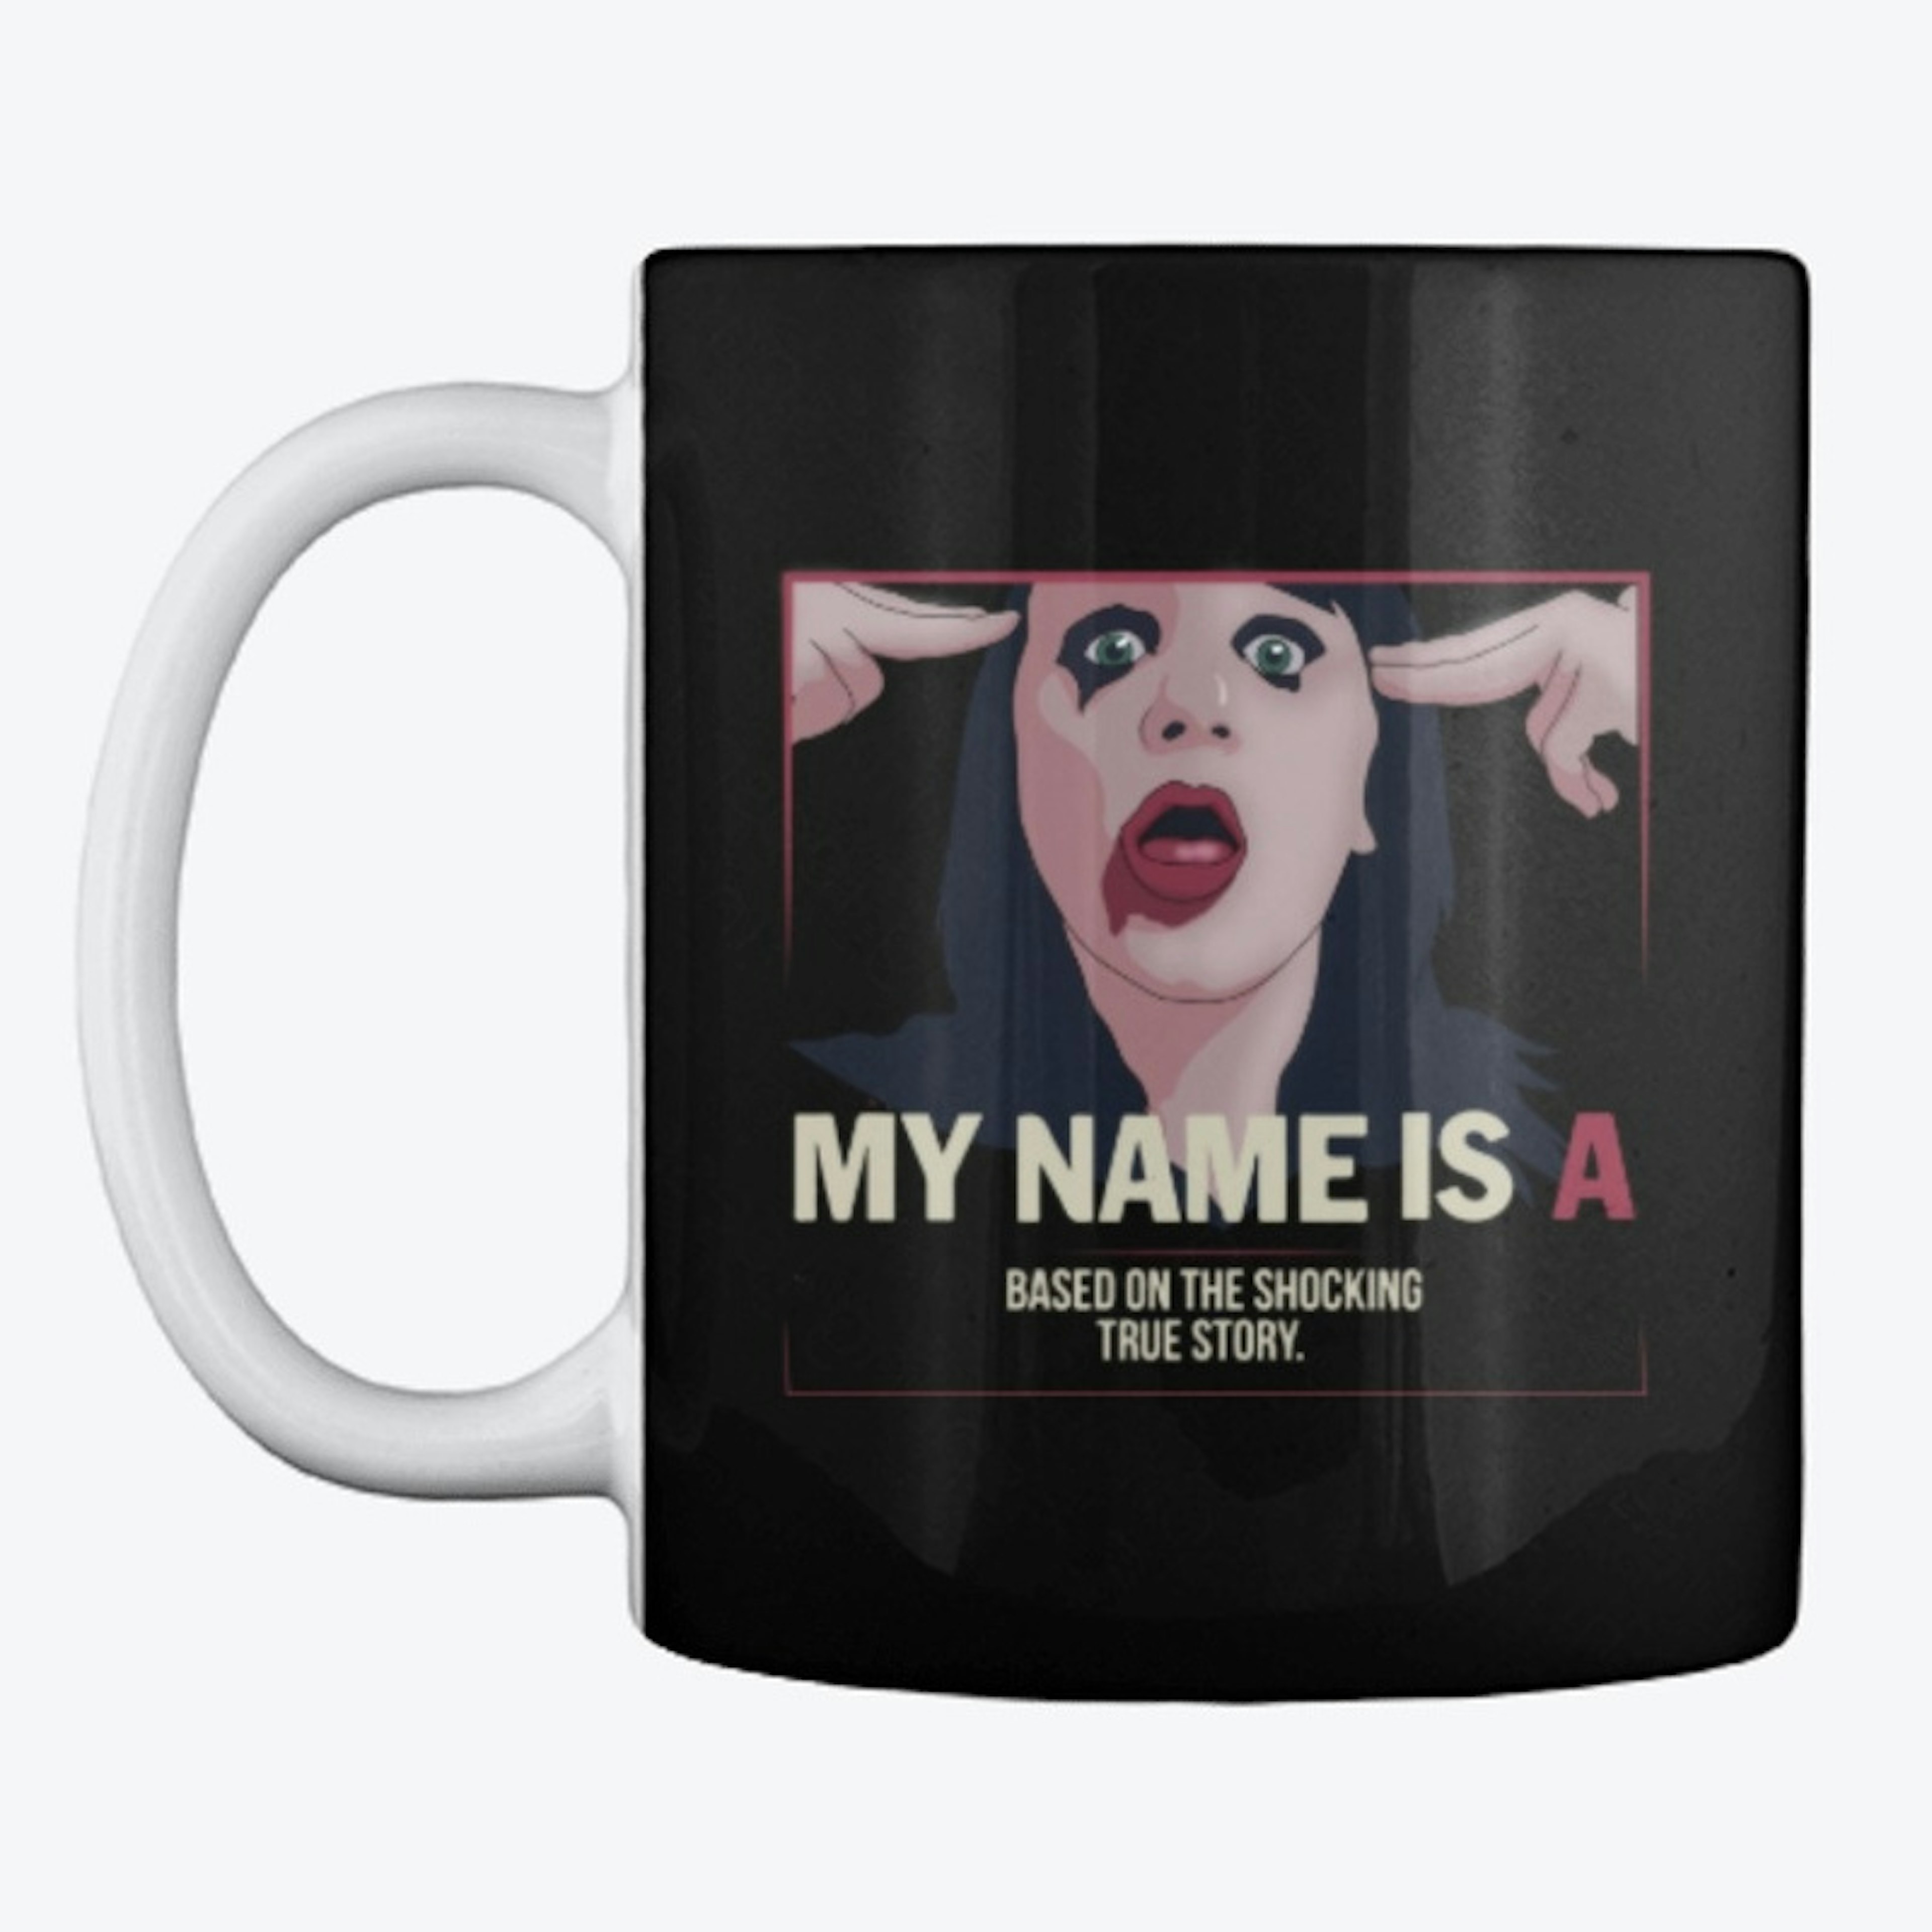 My Name is 'A' by anonymous - film merch